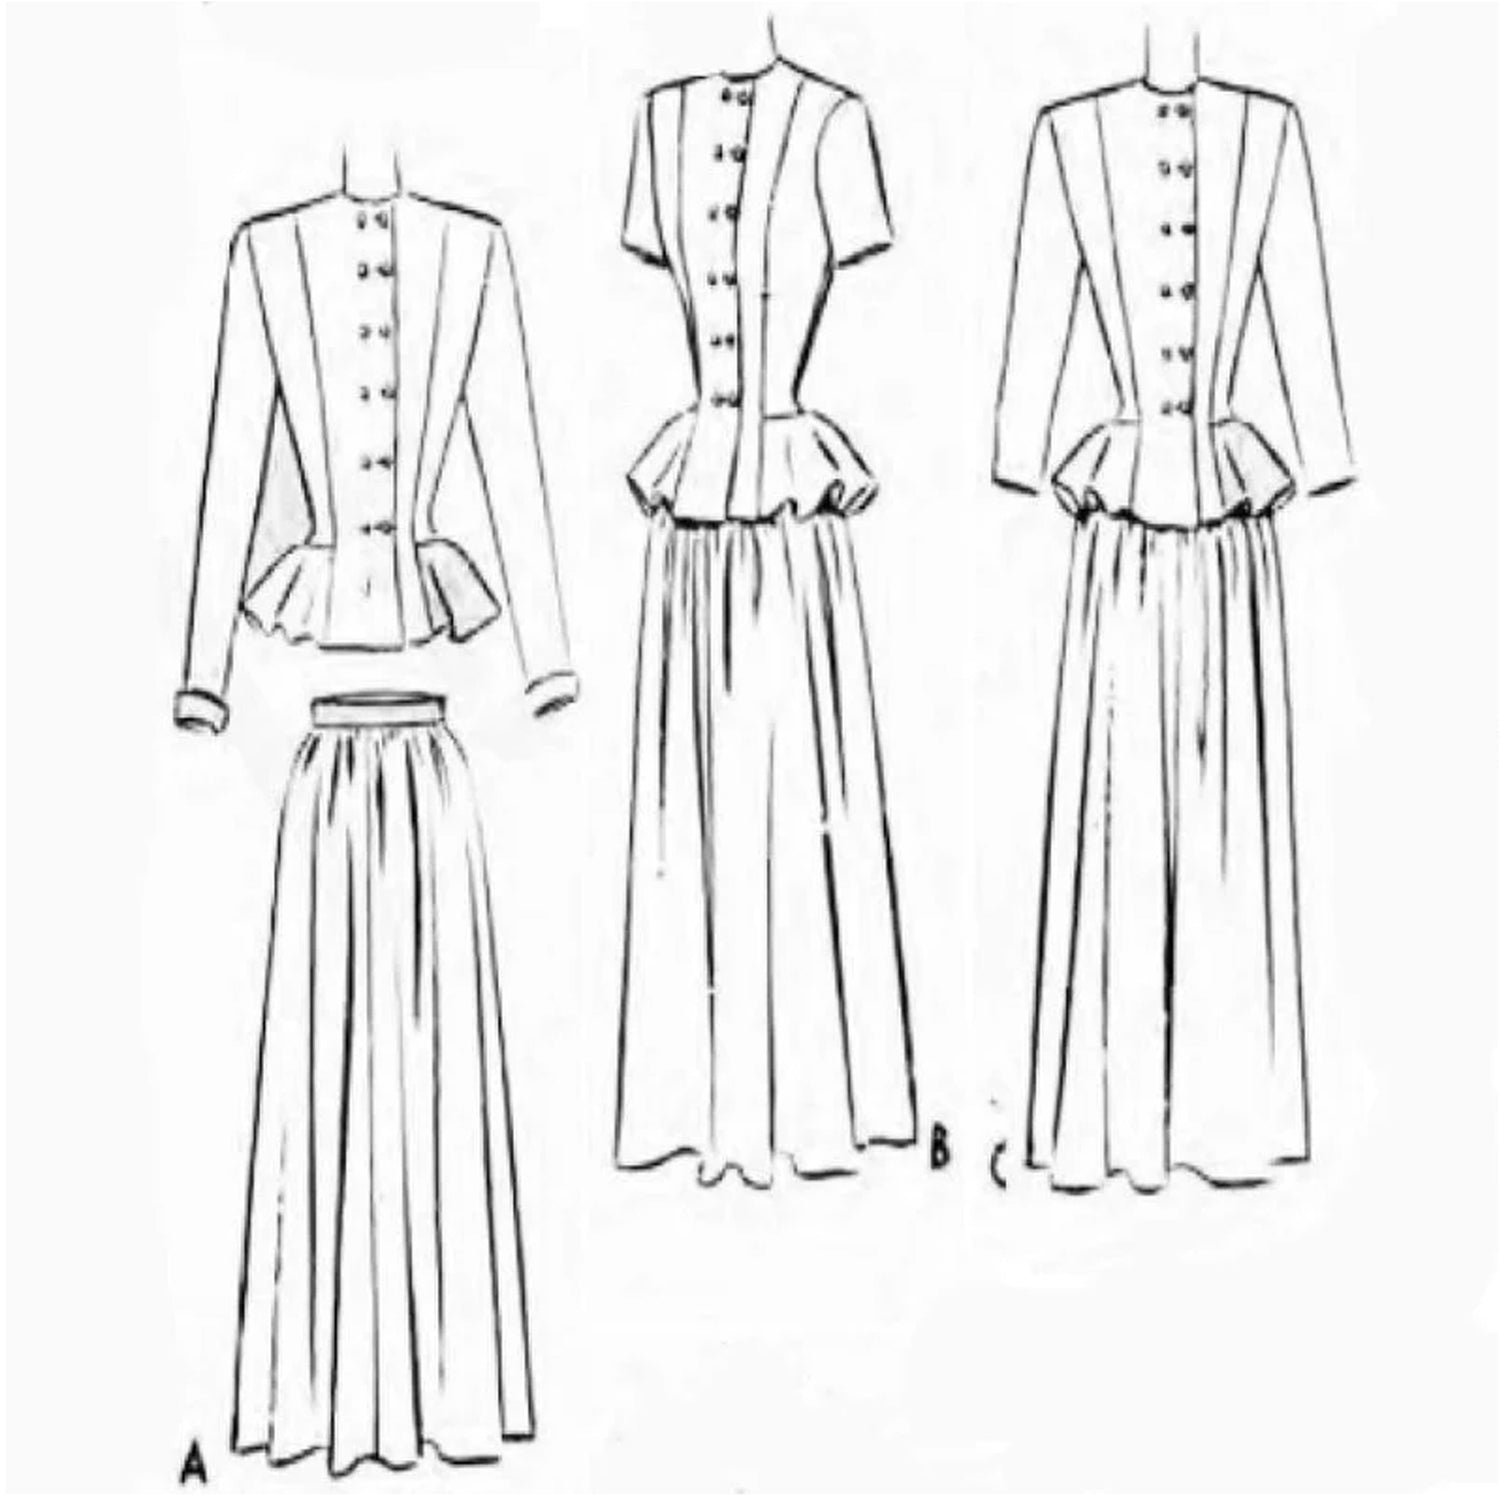 Line drawings of two-piece dress with sleeve variations